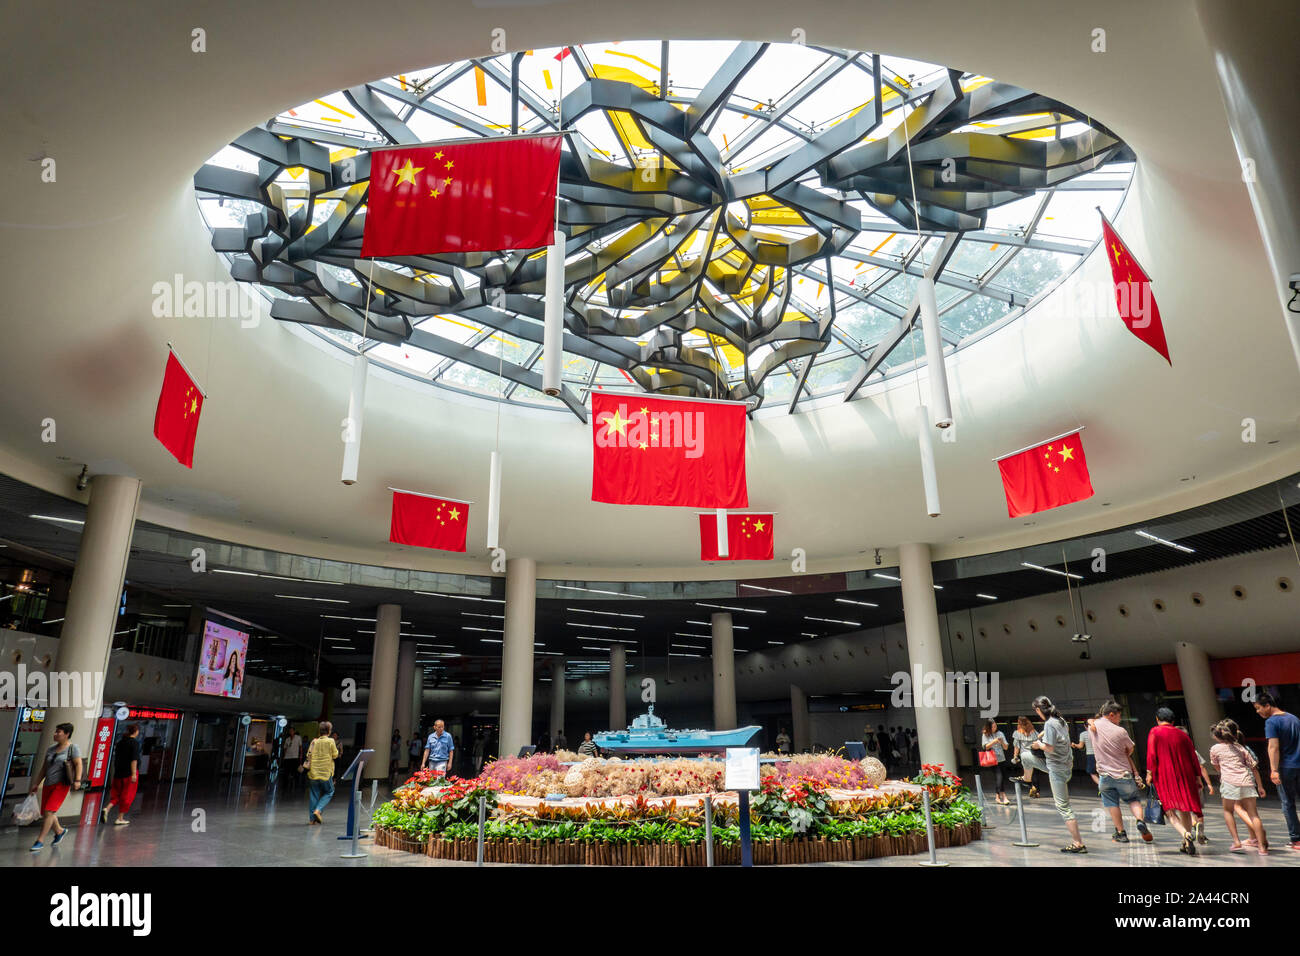 Seven national flags are hung to celebrate the 70th anniversary of the founding of the People's Republic of China at the People's Square subway statio Stock Photo